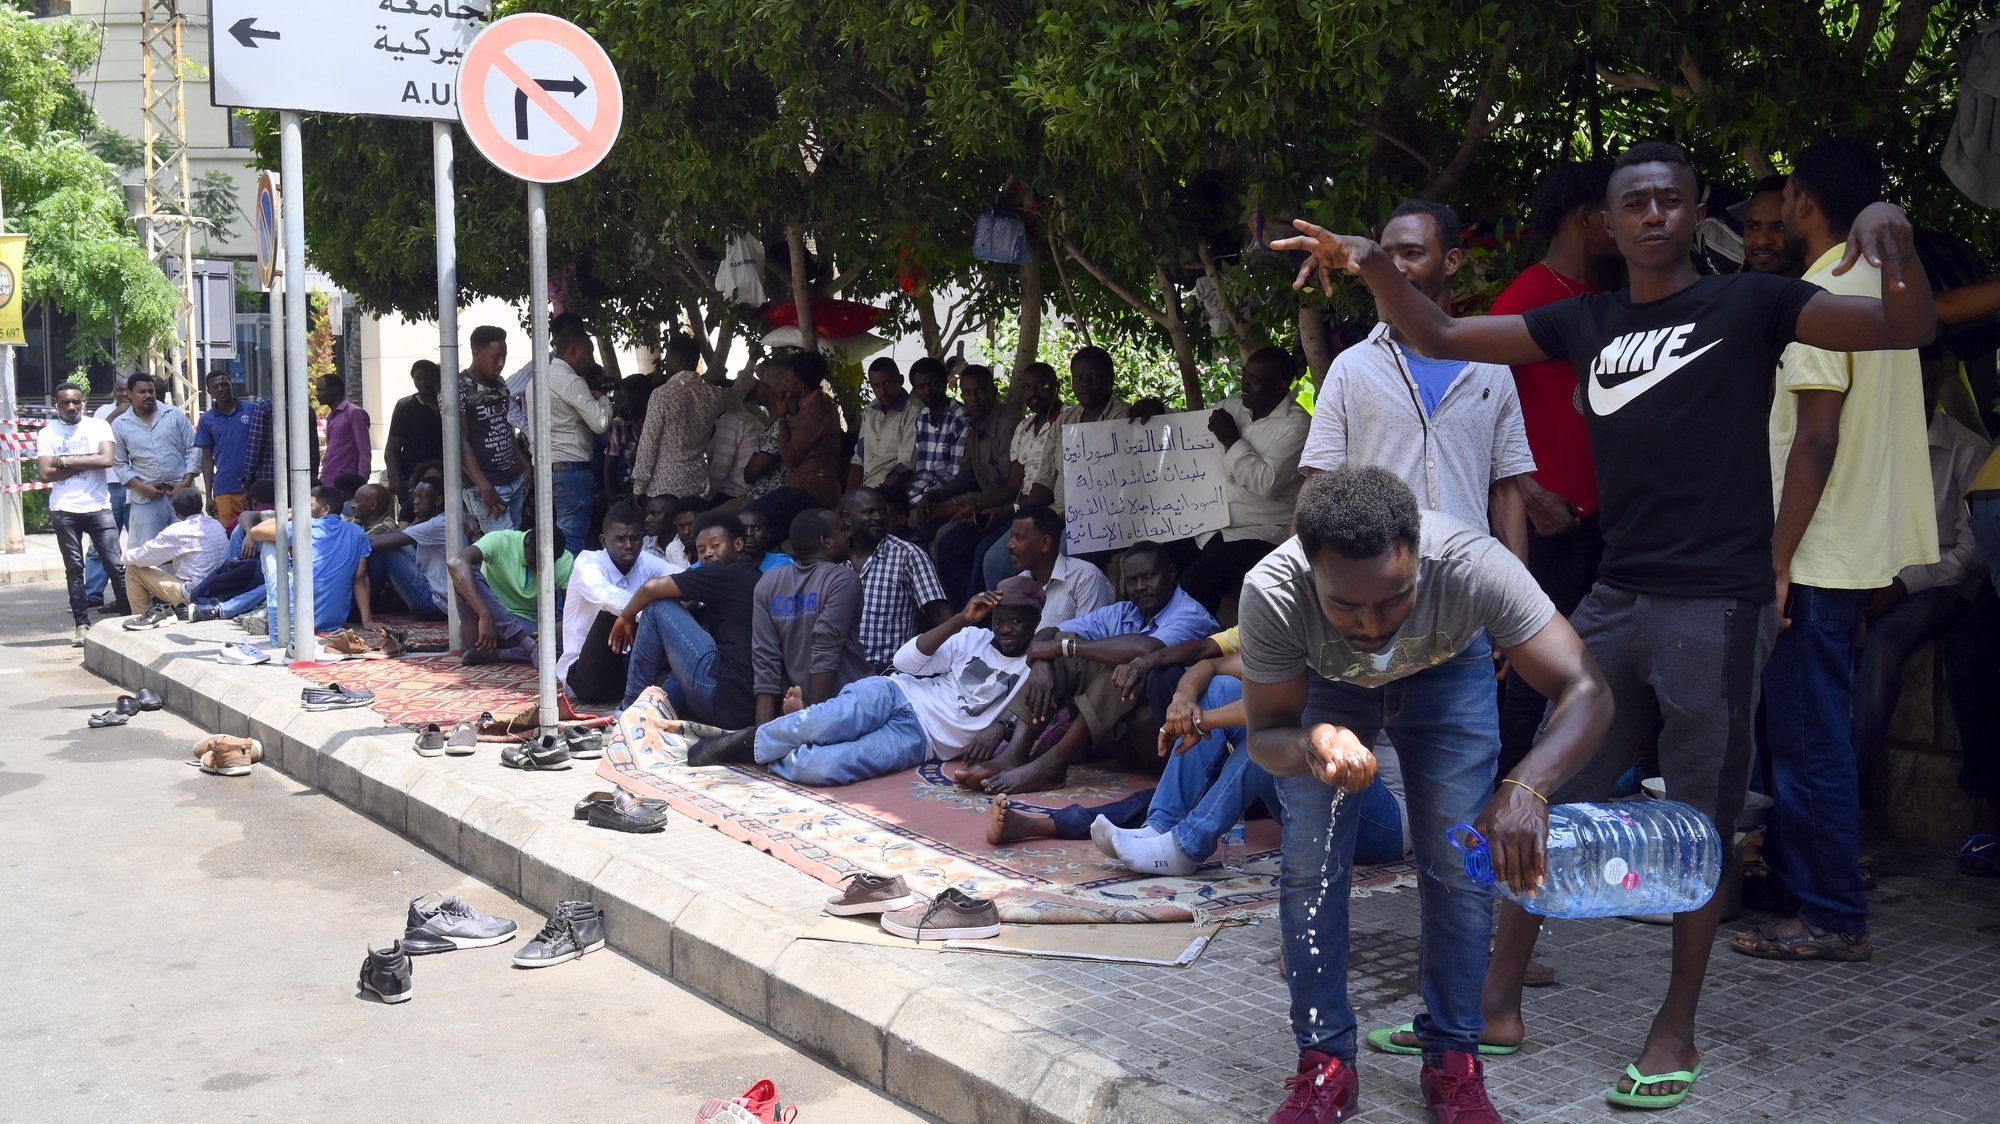 epa08524805 Sudanese workers sit on the floor during a protest in front of their country’s Embassy in Beirut, Lebanon, 03 July 2020. According to a spokesperson on behalf of the protesters, there are about 3,000 Sudanese workers stuck in Lebanon. He added that the Sudanese government has repatriated workers from the Emirates and Qatar, but disregarded those stuck in both Lebanon and Libya. Numerous foreign domestic and migrant workers are suffering the consequences of the economic crisis in Lebanon due to a shortage of dollars, these workers are unable to get their salaries in USD as per their contracts.  EPA/WAEL HAMZEH